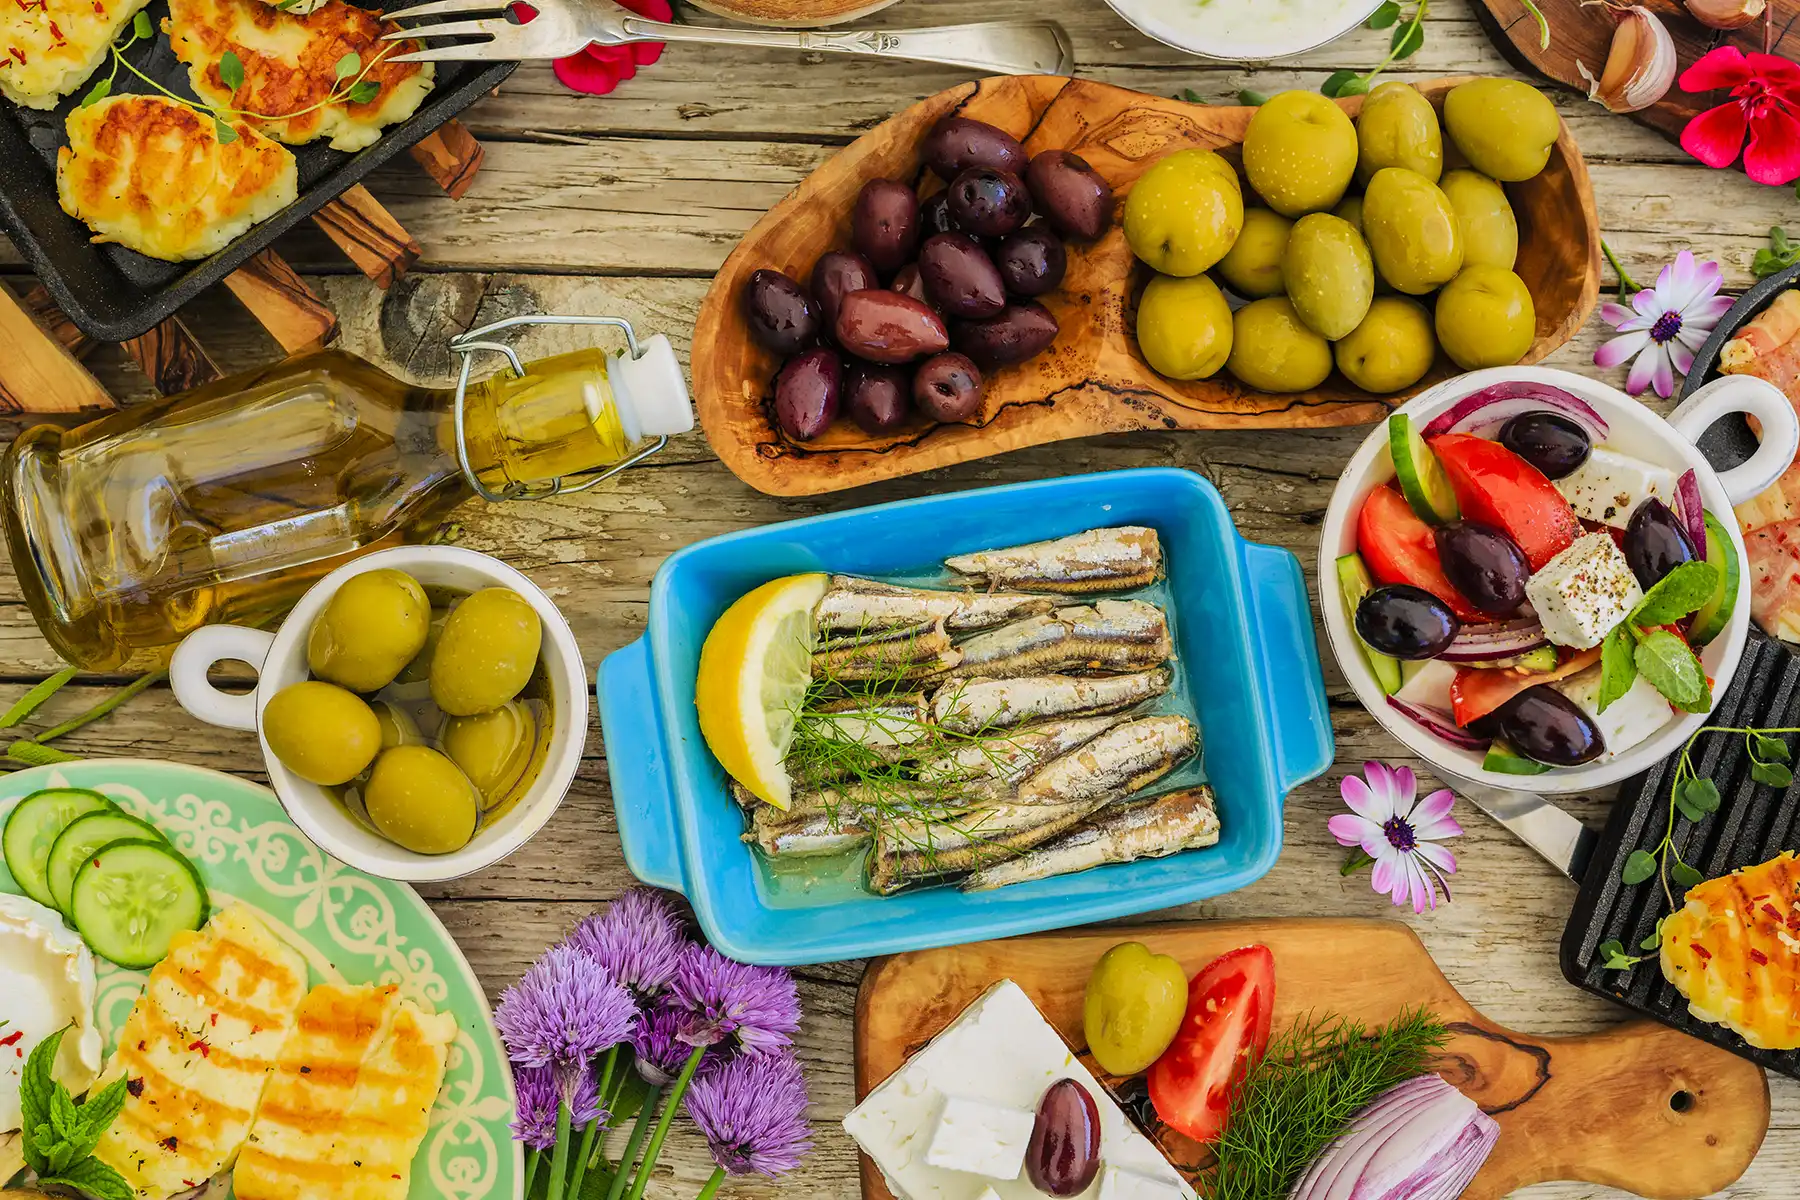 Various different food options that make up the Mediterranean diet, including olive oil, fish, fruits, vegetables, and spices.